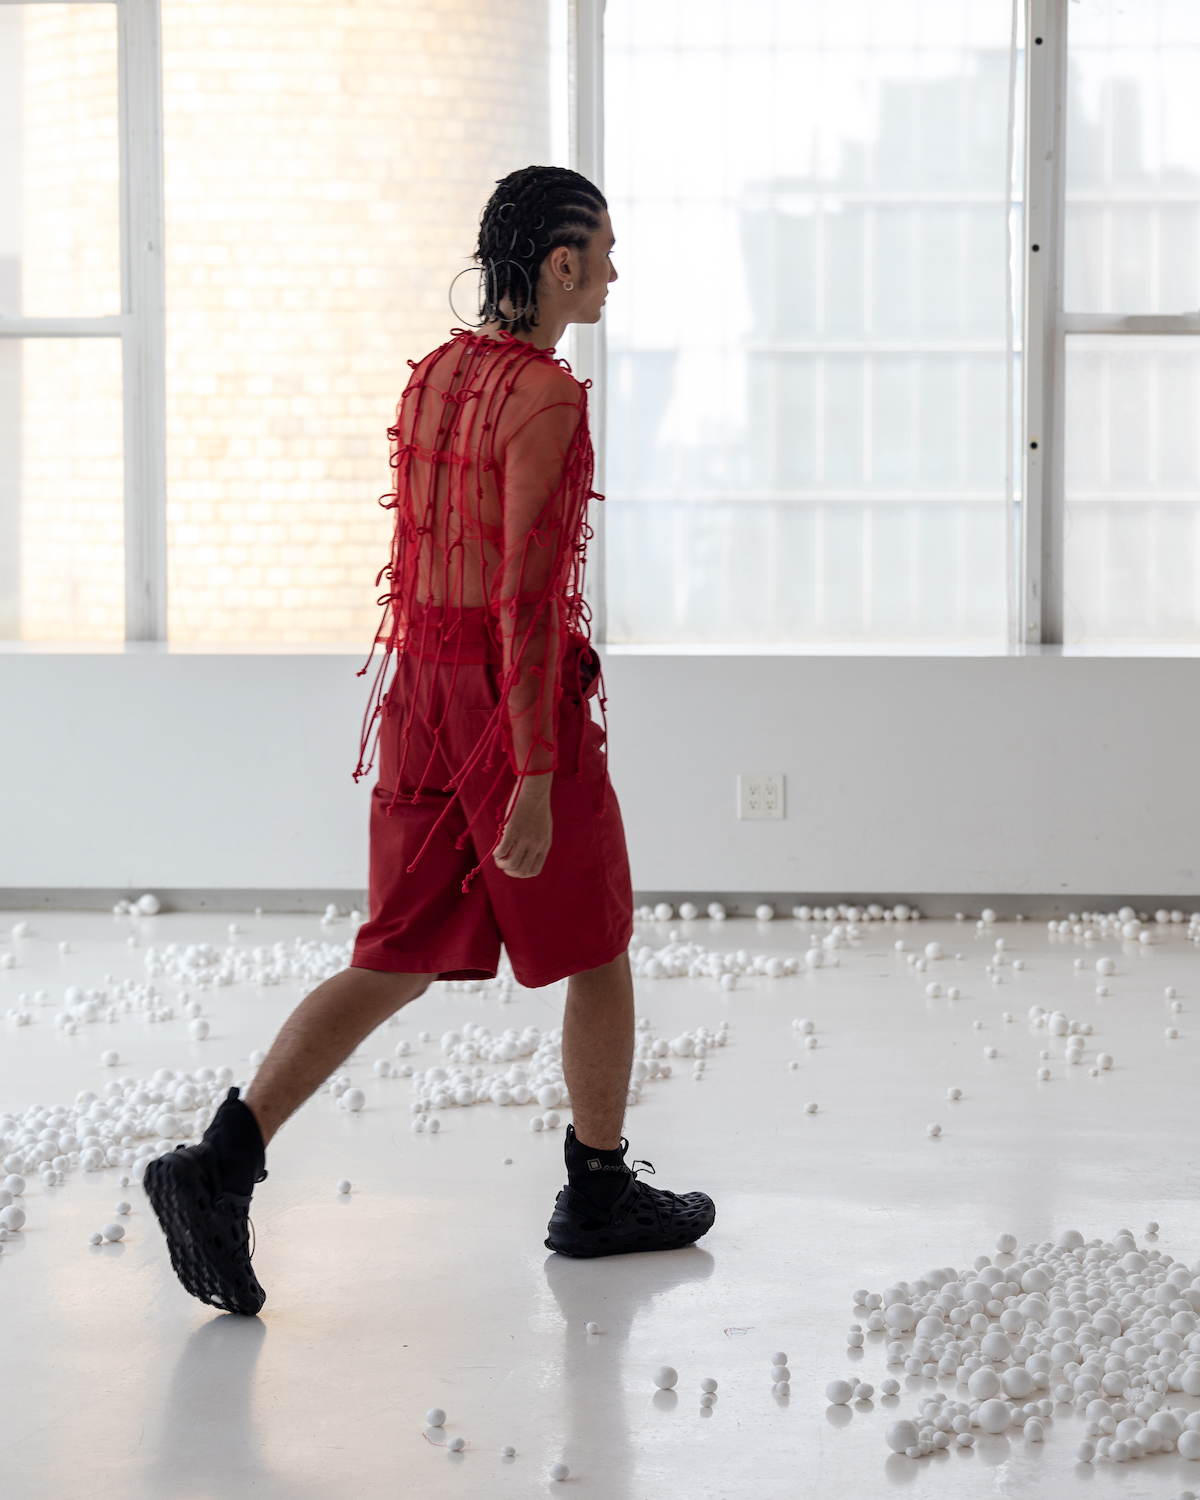 A model wearing a red mesh top and red shorts walks away from the camera. The model is wearing clothes from CLARA SON.